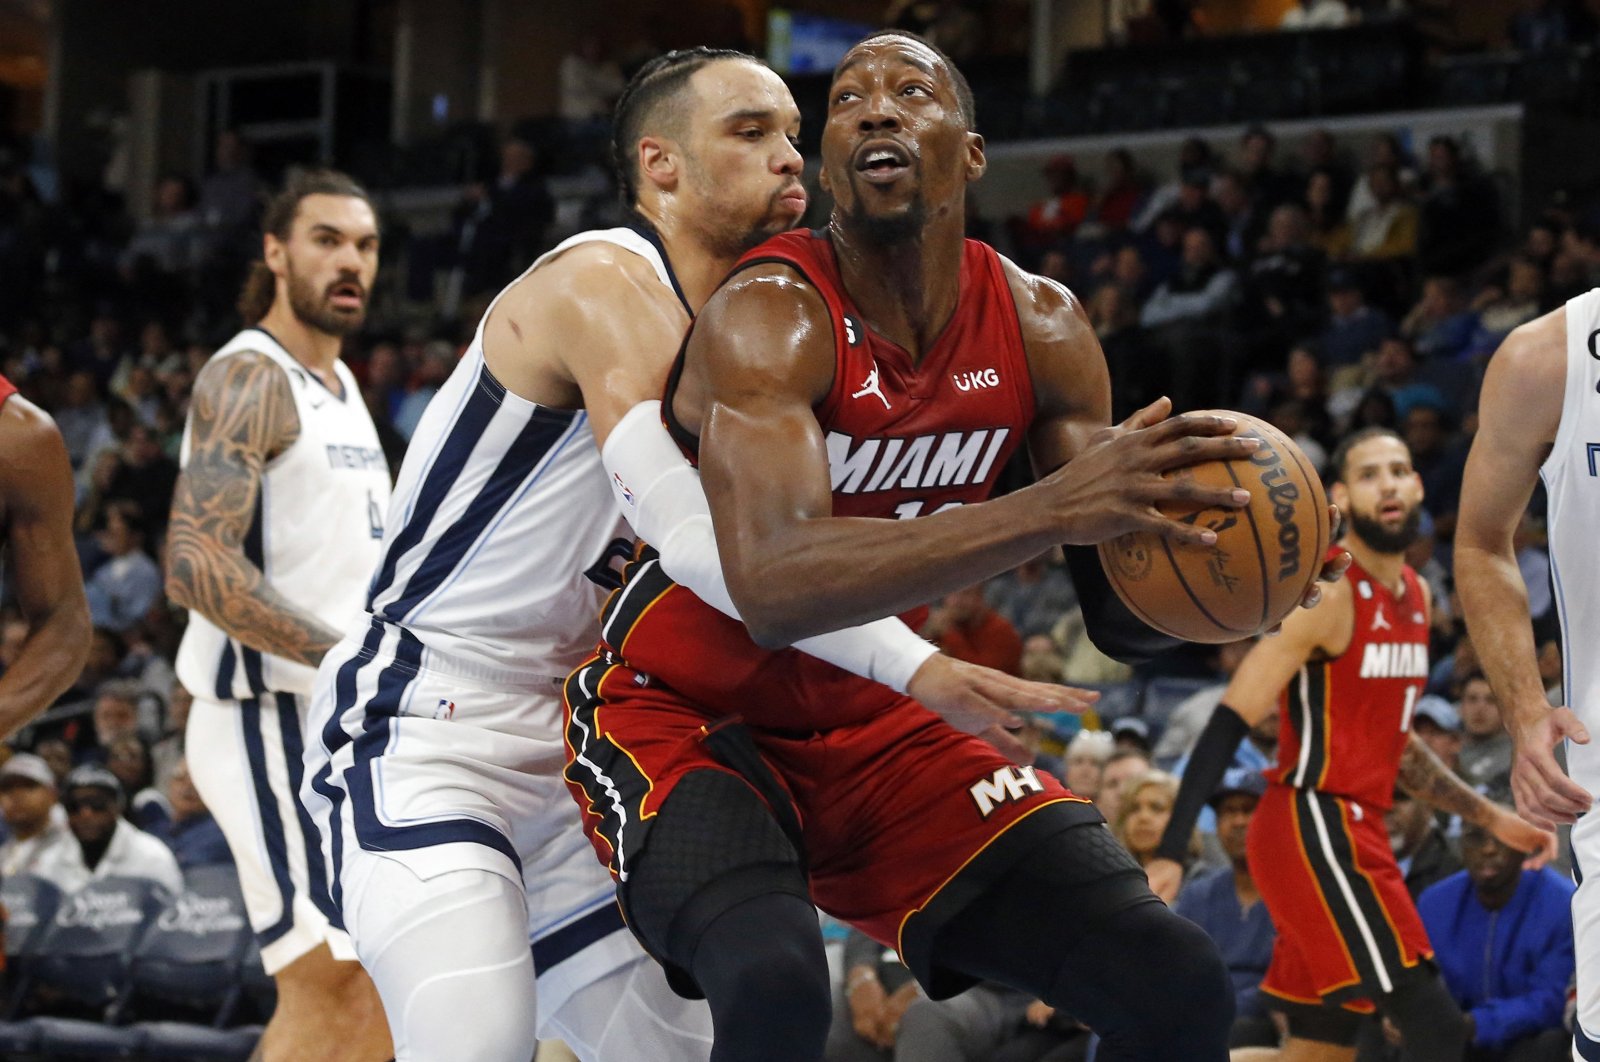 Miami Heat center Bam Adebayo drives to the basket as Memphis Grizzlies forward Dillon Brooks defends during the first half at FedExForum, Memphis, Tennessee, U.S., Dec. 5, 2022. (Reuters Photo)